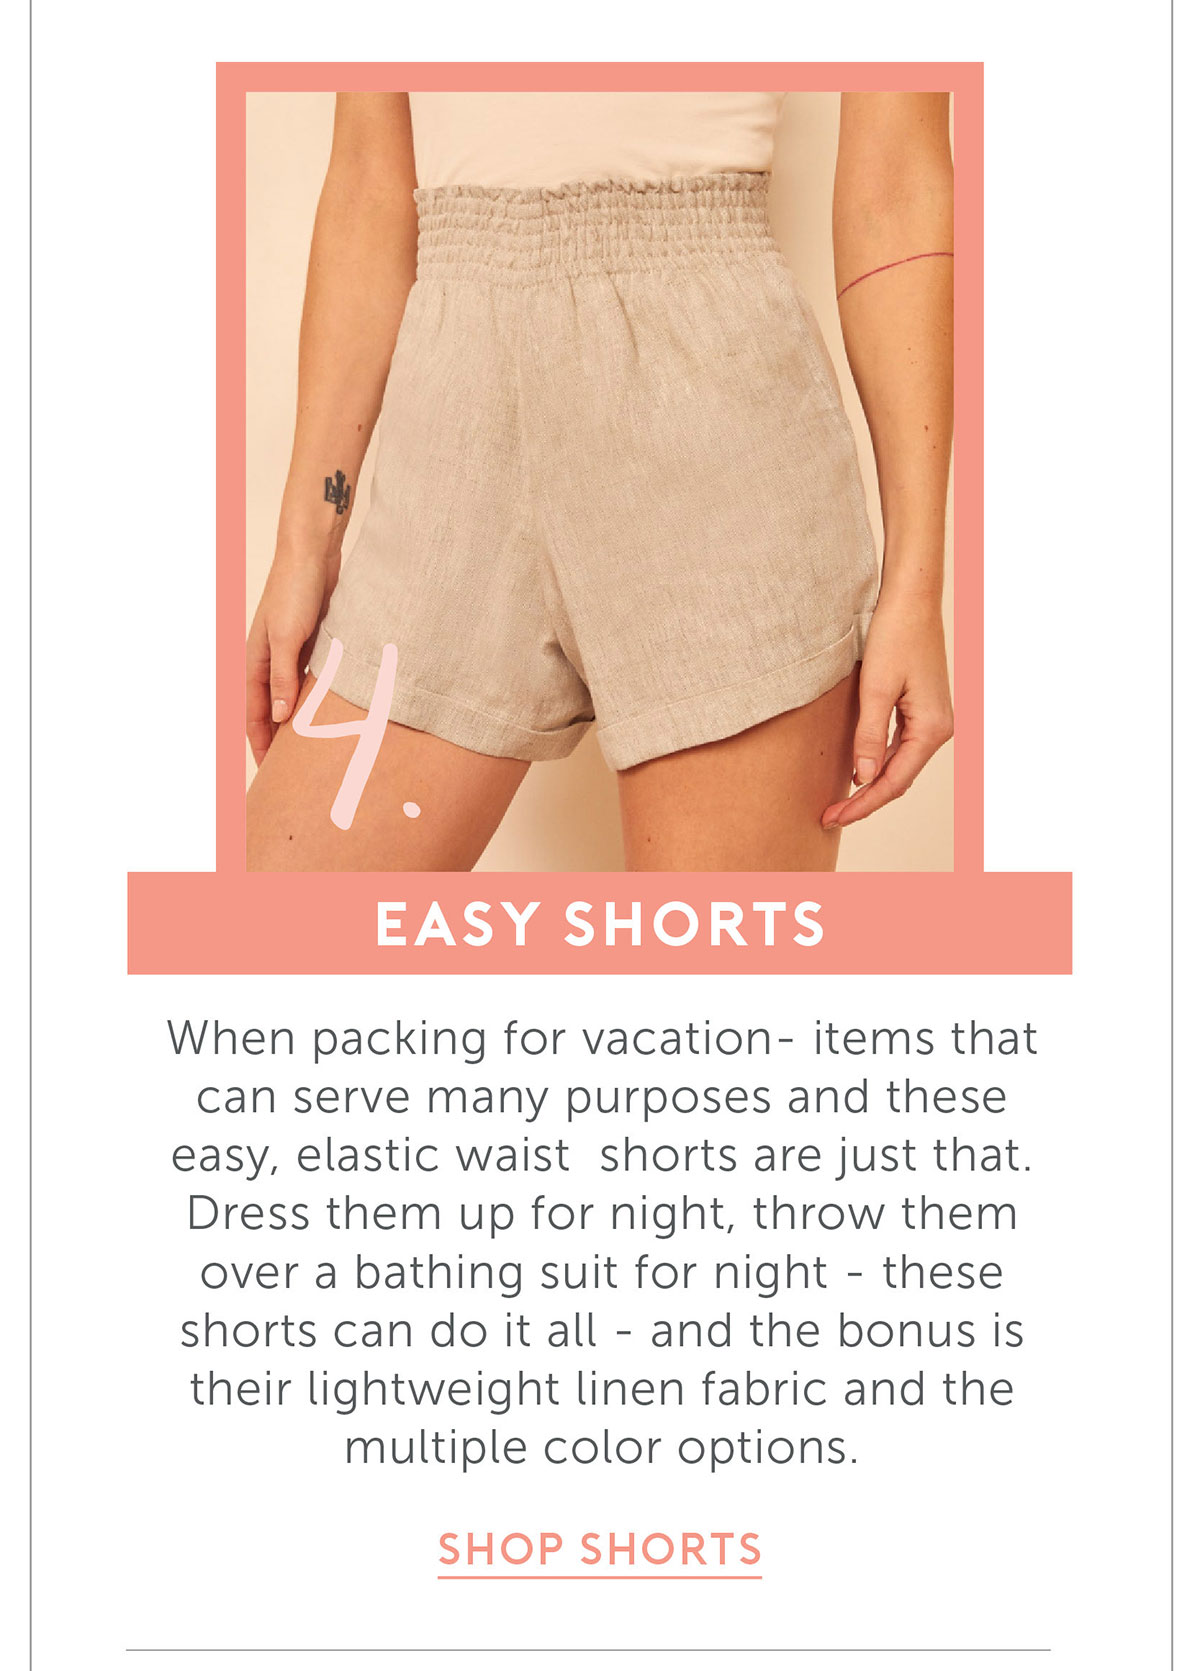 Easy Shorts When packing for vacation- items that can serve many purposes and these easy, elastic waist shorts are just that. Dress them up for night, throw them over a bathing suit for night- these shorts can do it all- and the bonus is their lightweight linen fabric and the multiple color options.